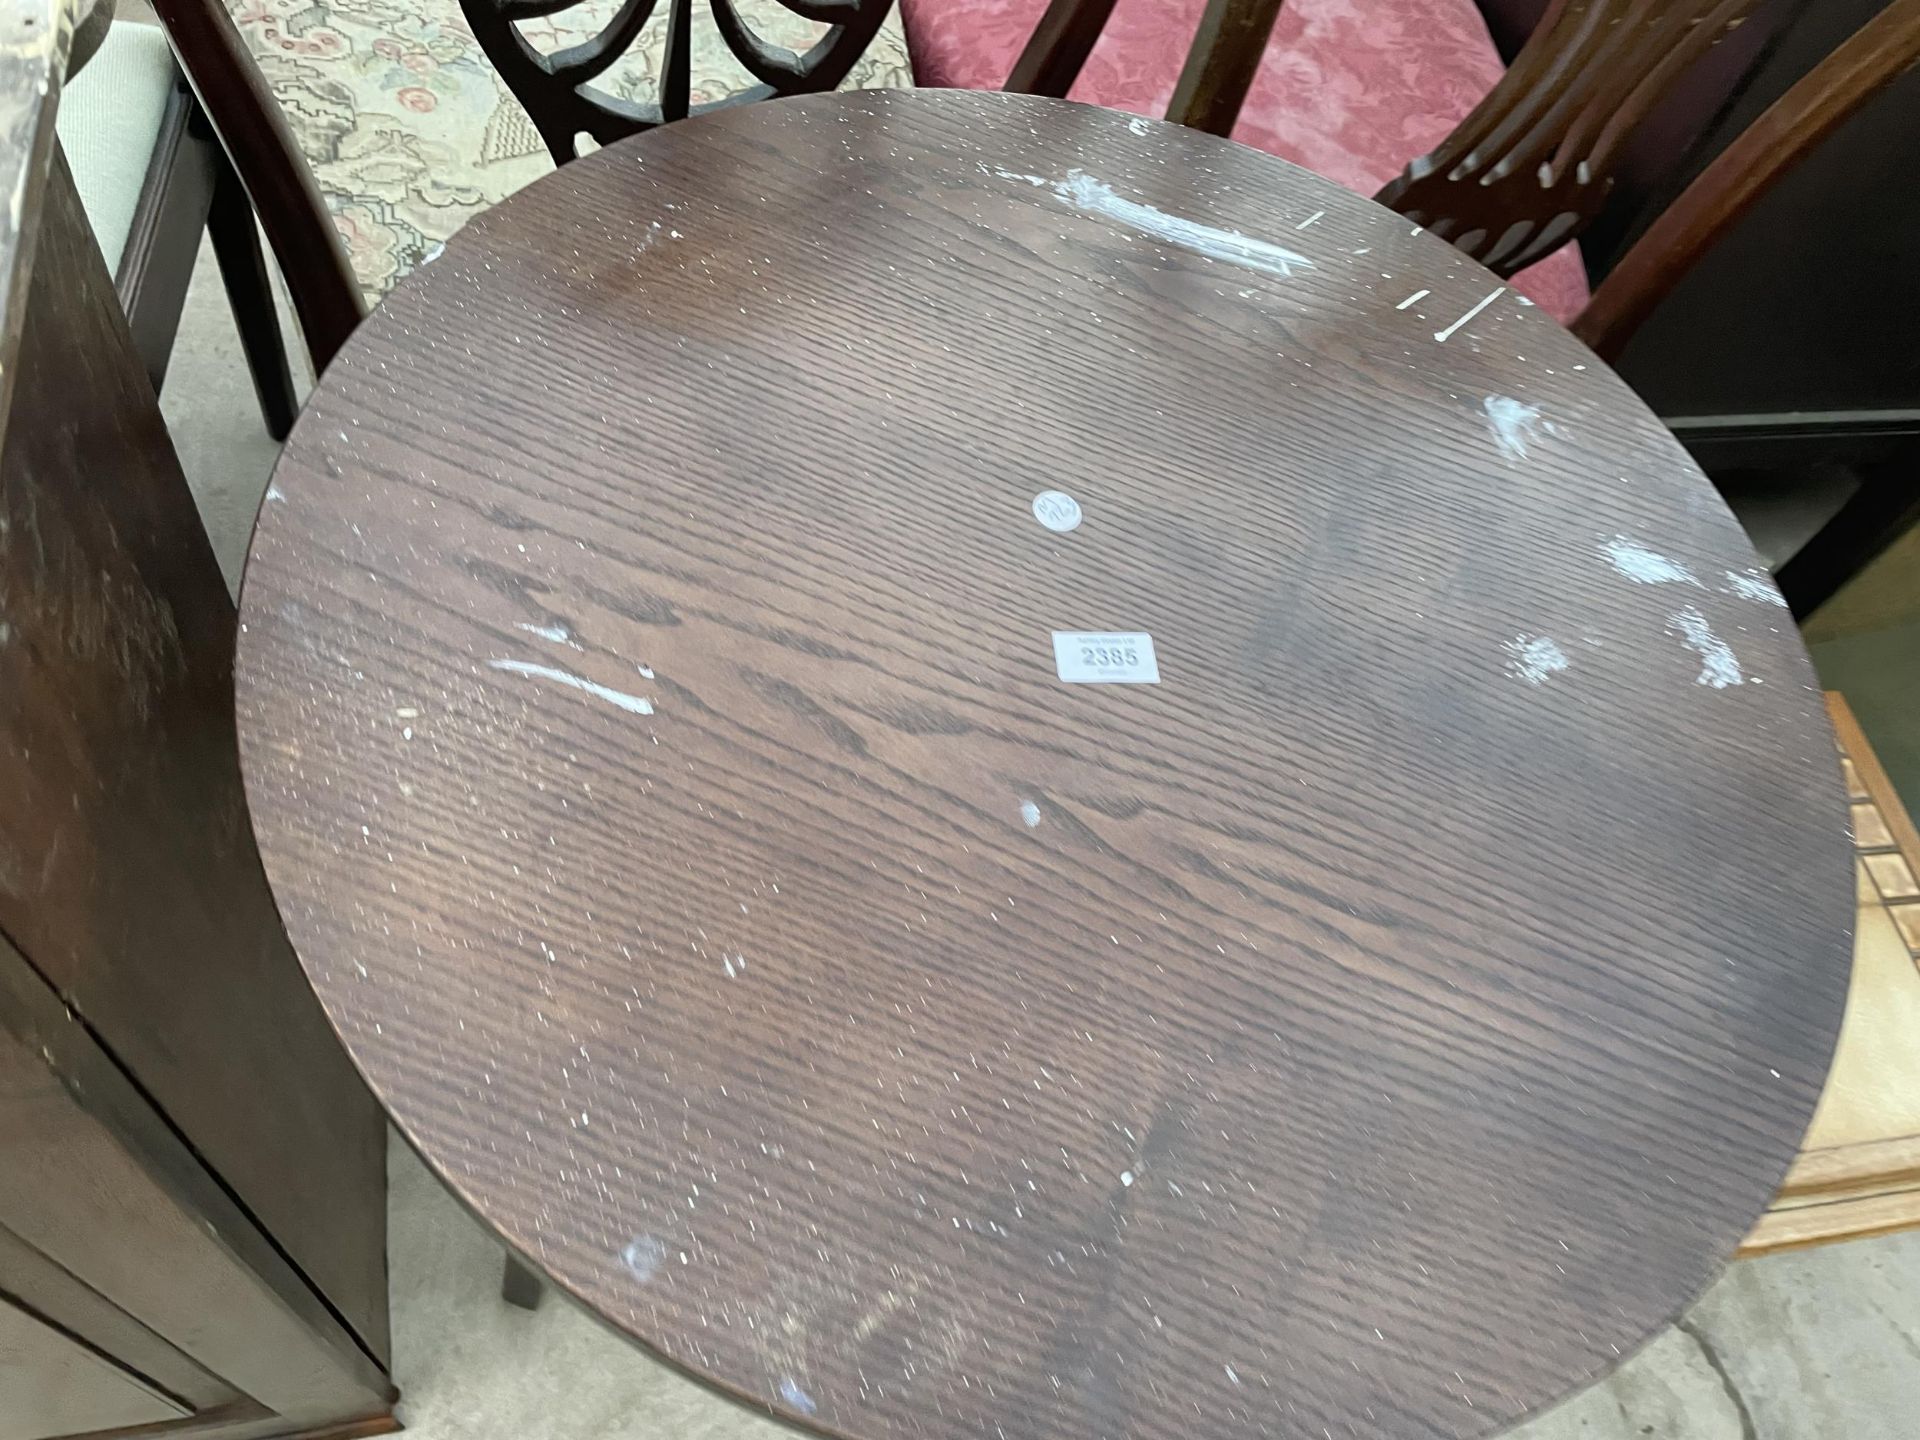 A PUB TABLE AND NEST OF TWO TABLES - Image 2 of 3